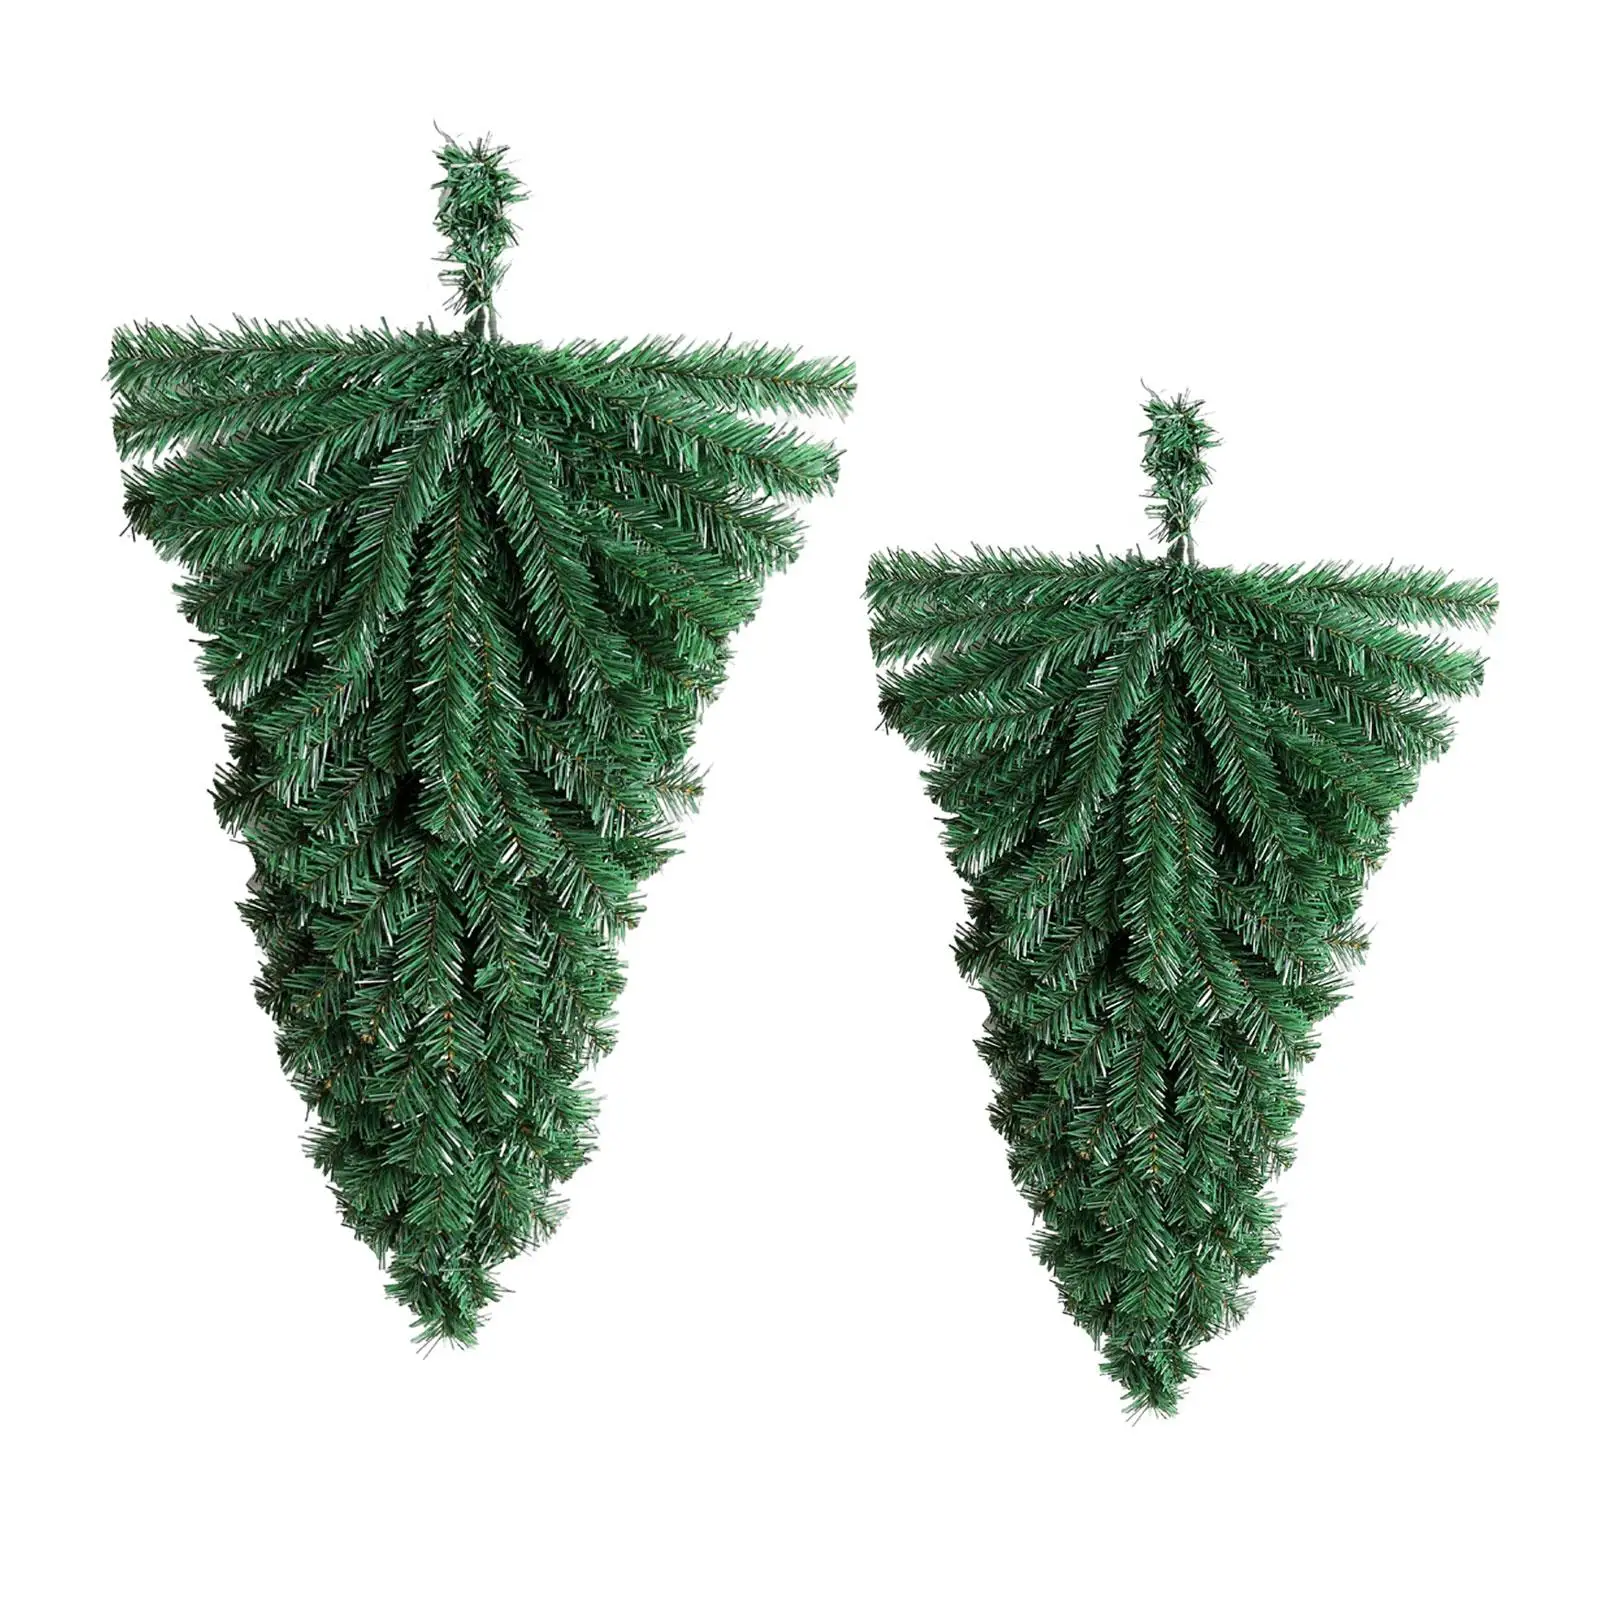 Artificial Christmas Tree Wreath Wall Hanging Garland Branches Ornament Door